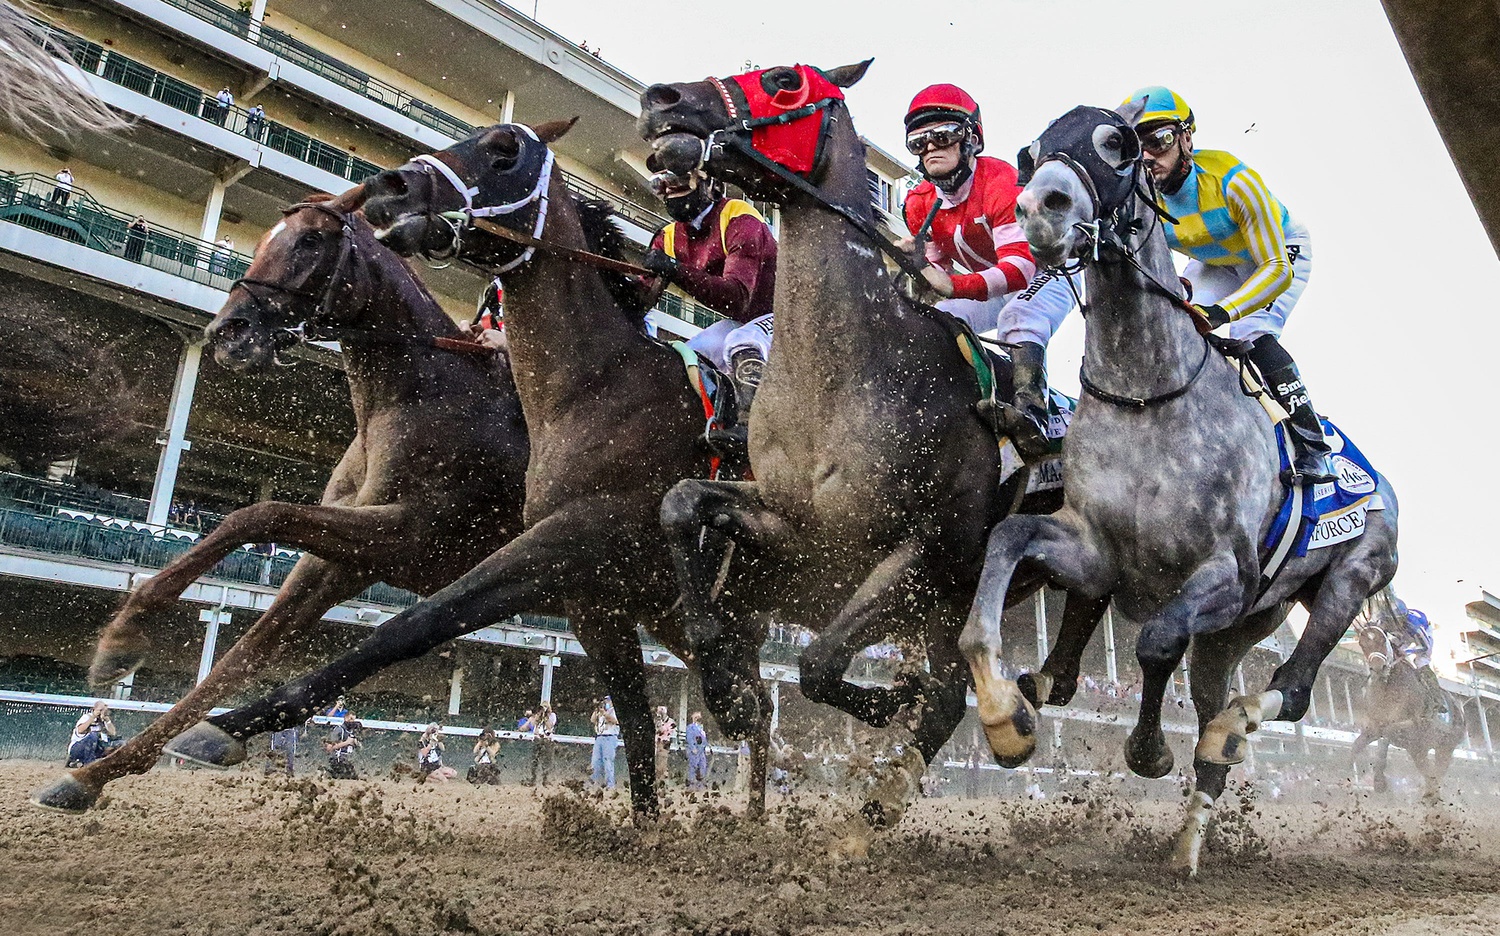 New Jersey to offer fixed odds horse racing bets